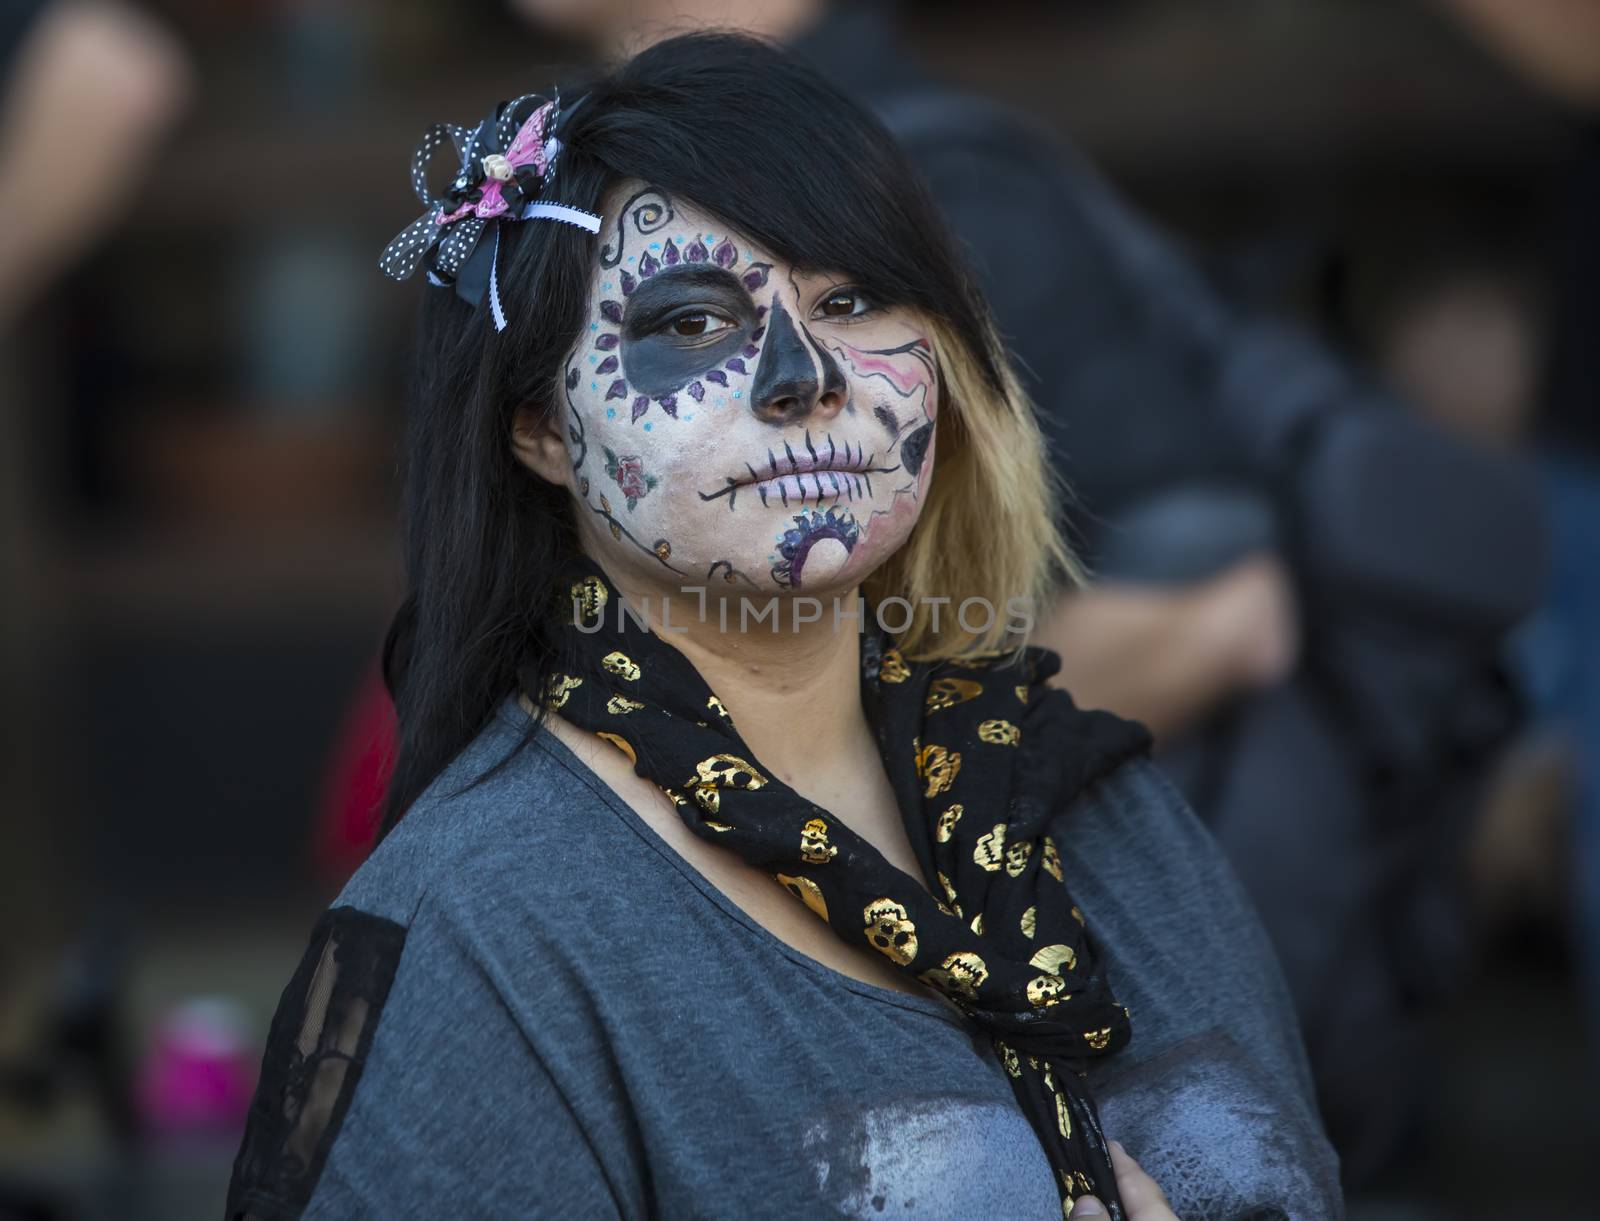 TUCSON, AZ/USA - NOVEMBER 09: Unidentified young woman in facepaint at the All Souls Procession on November 09, 2014 in Tucson, AZ, USA.